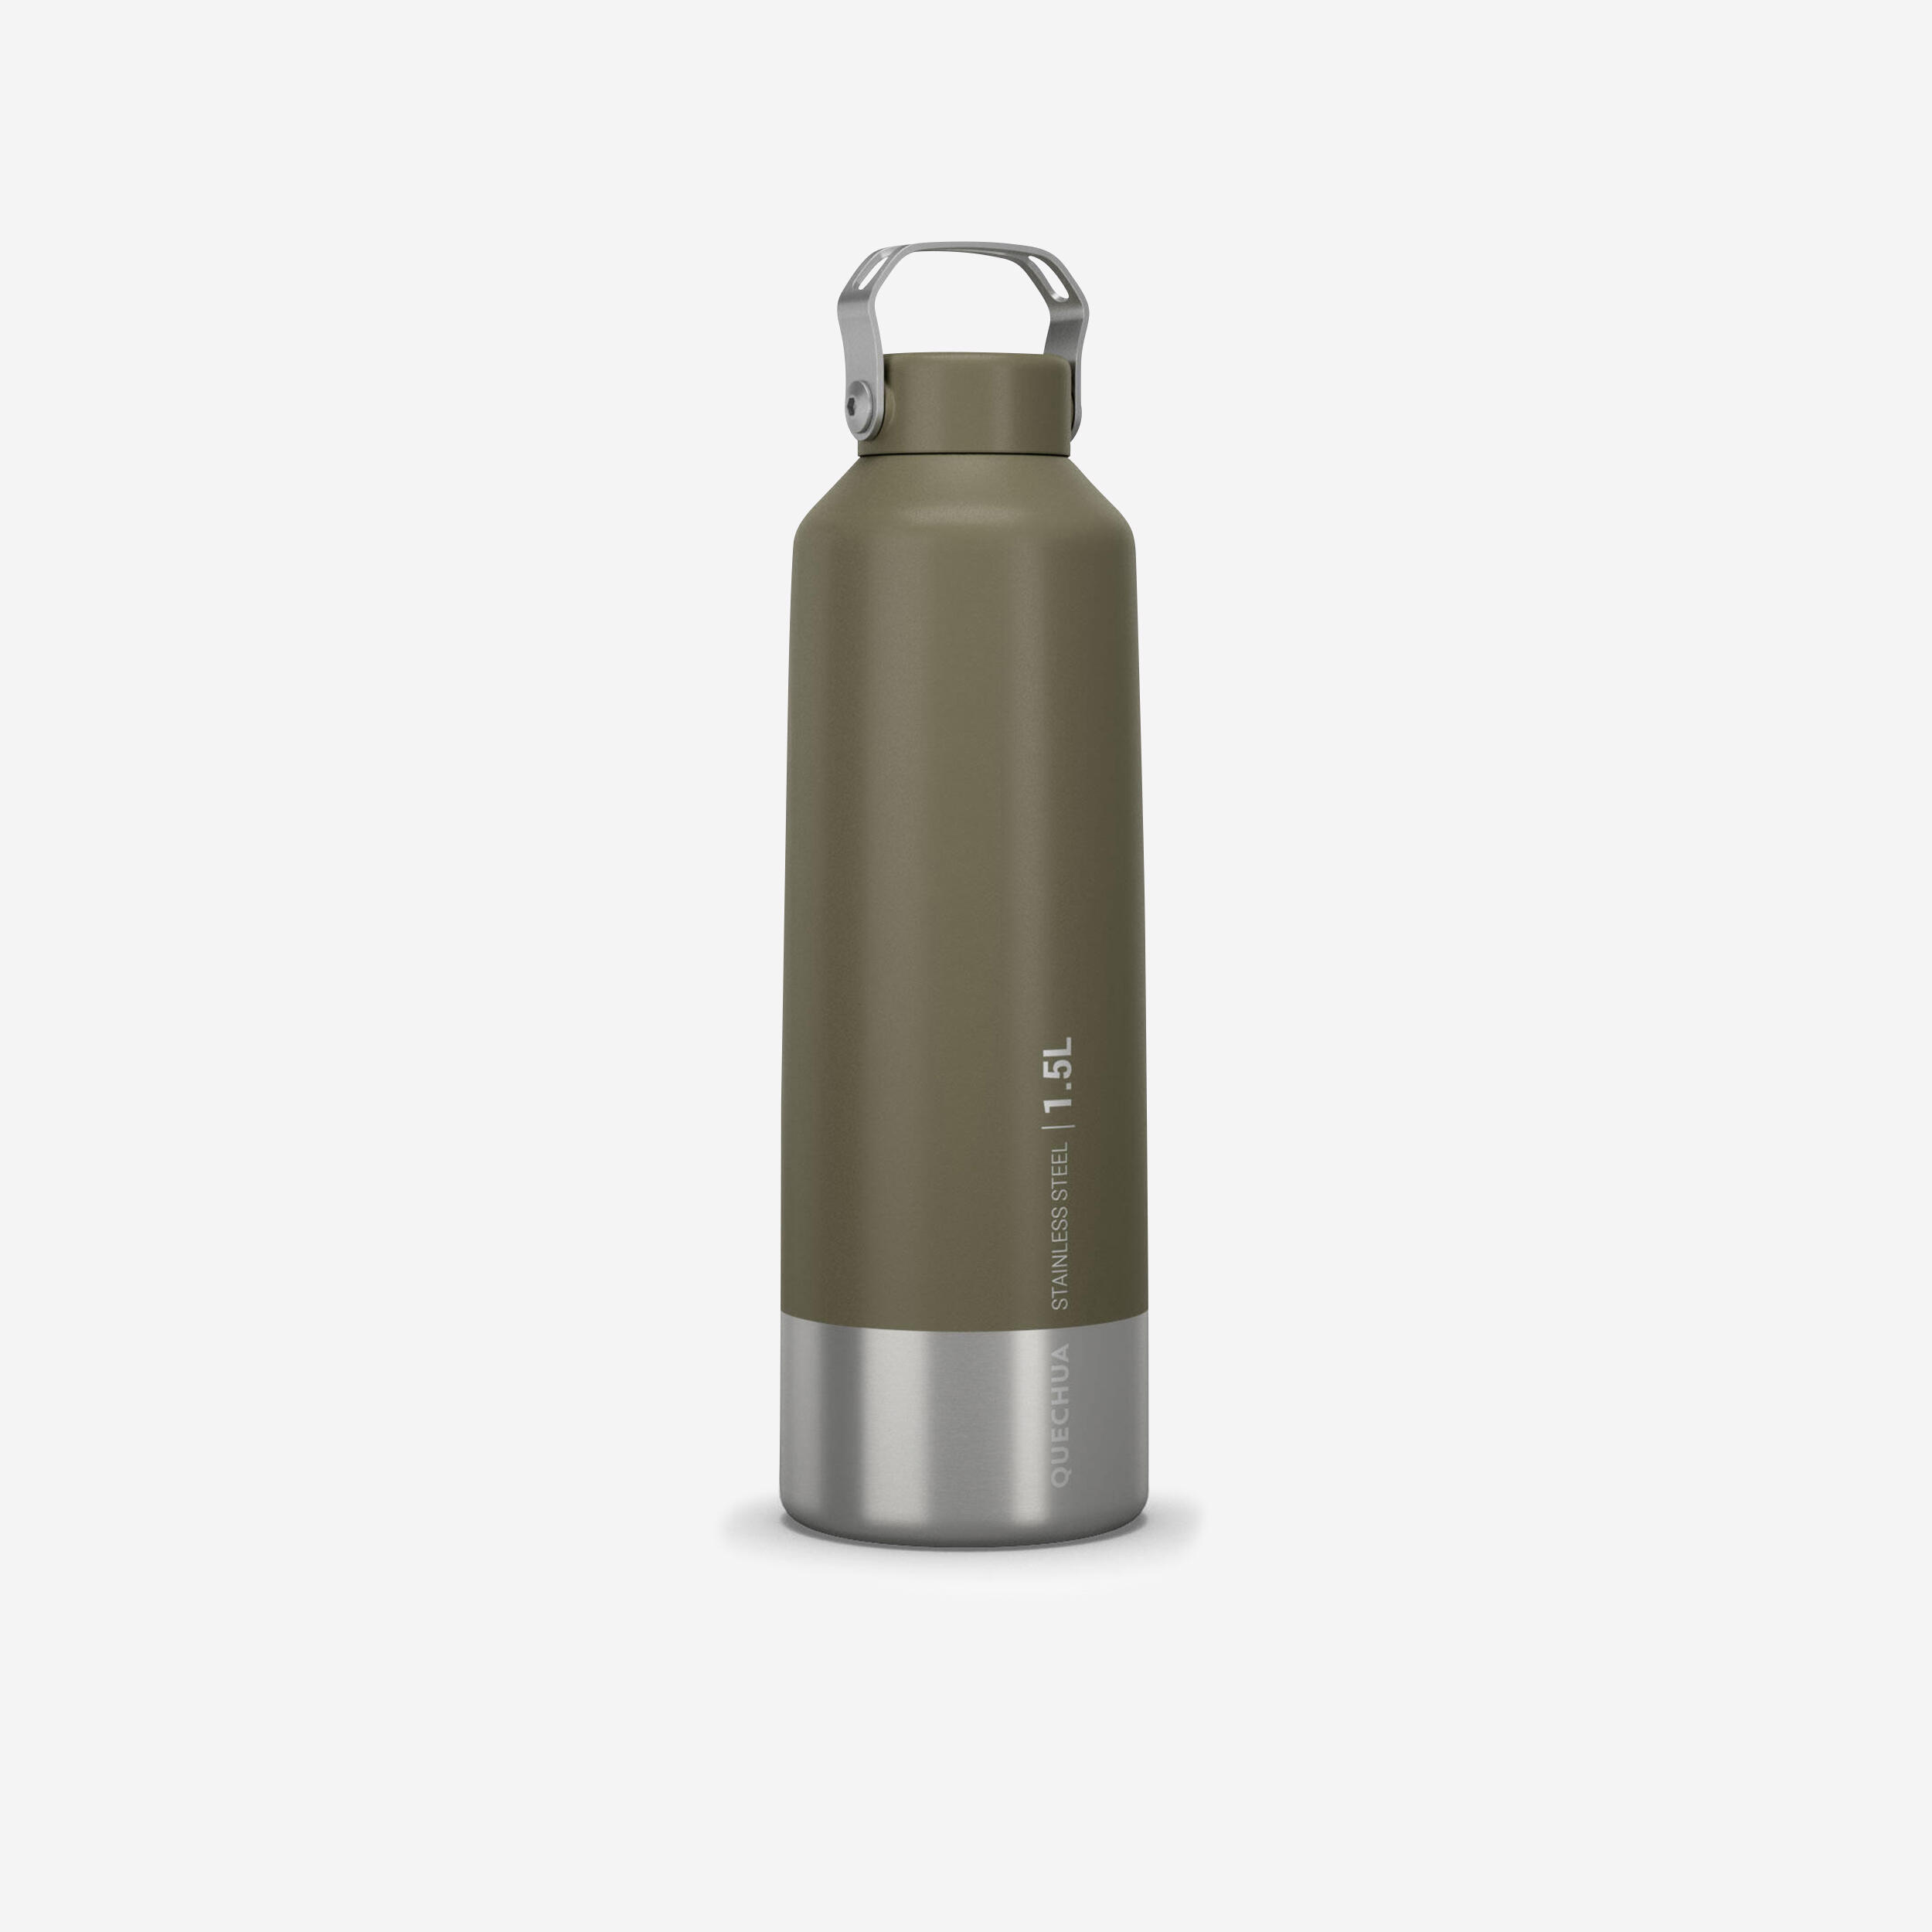 1.5 L stainless steel flask with screw cap for hiking - Khaki 1/10